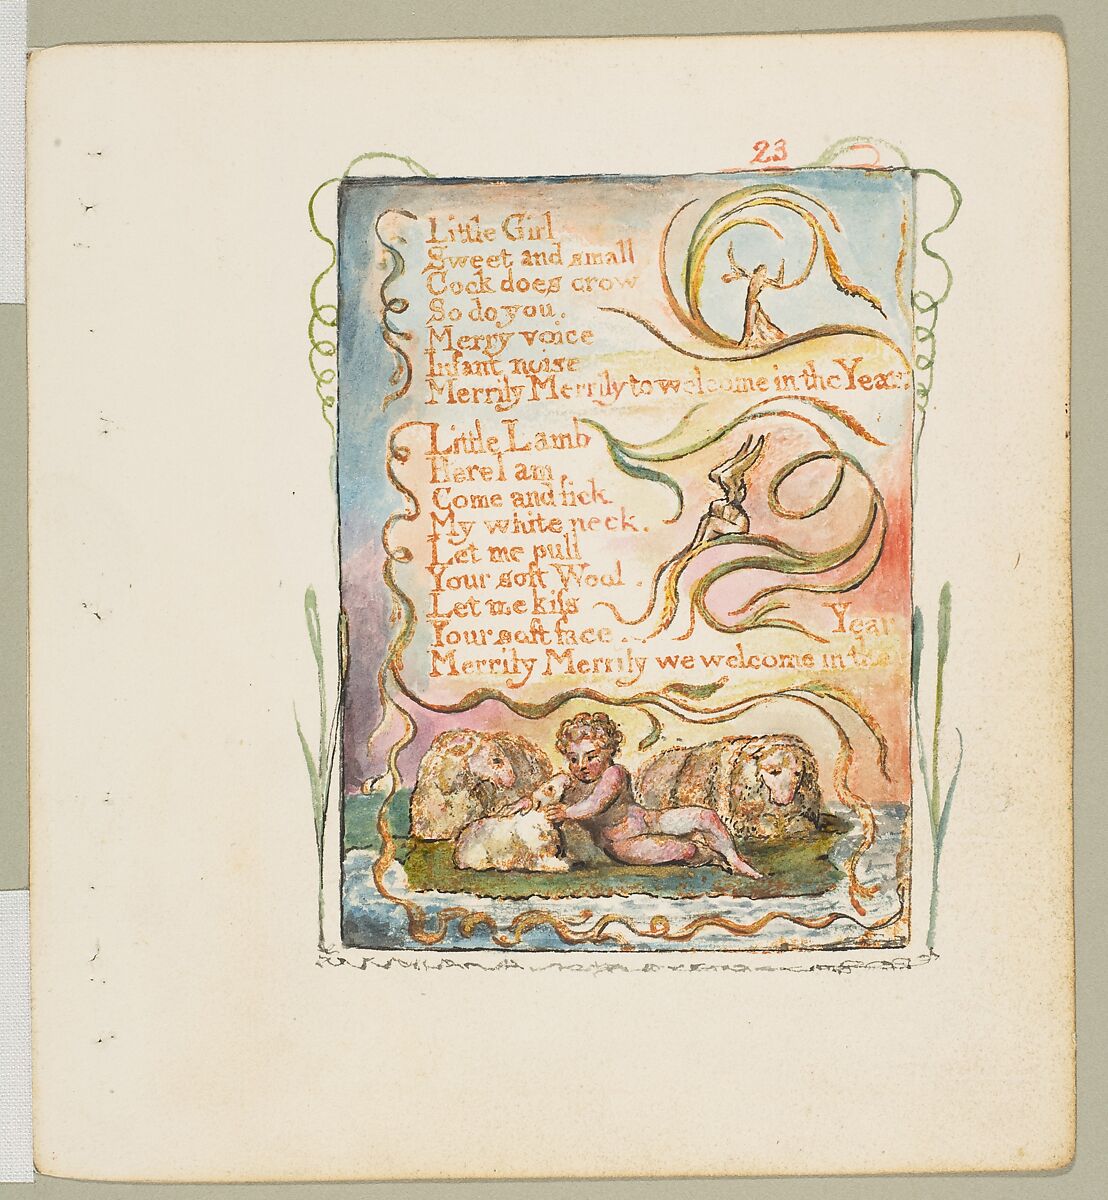 Songs of Innocence: Spring (second plate), William Blake, Relief etching printed in orange-brown ink and hand-colored with watercolor and shell gold